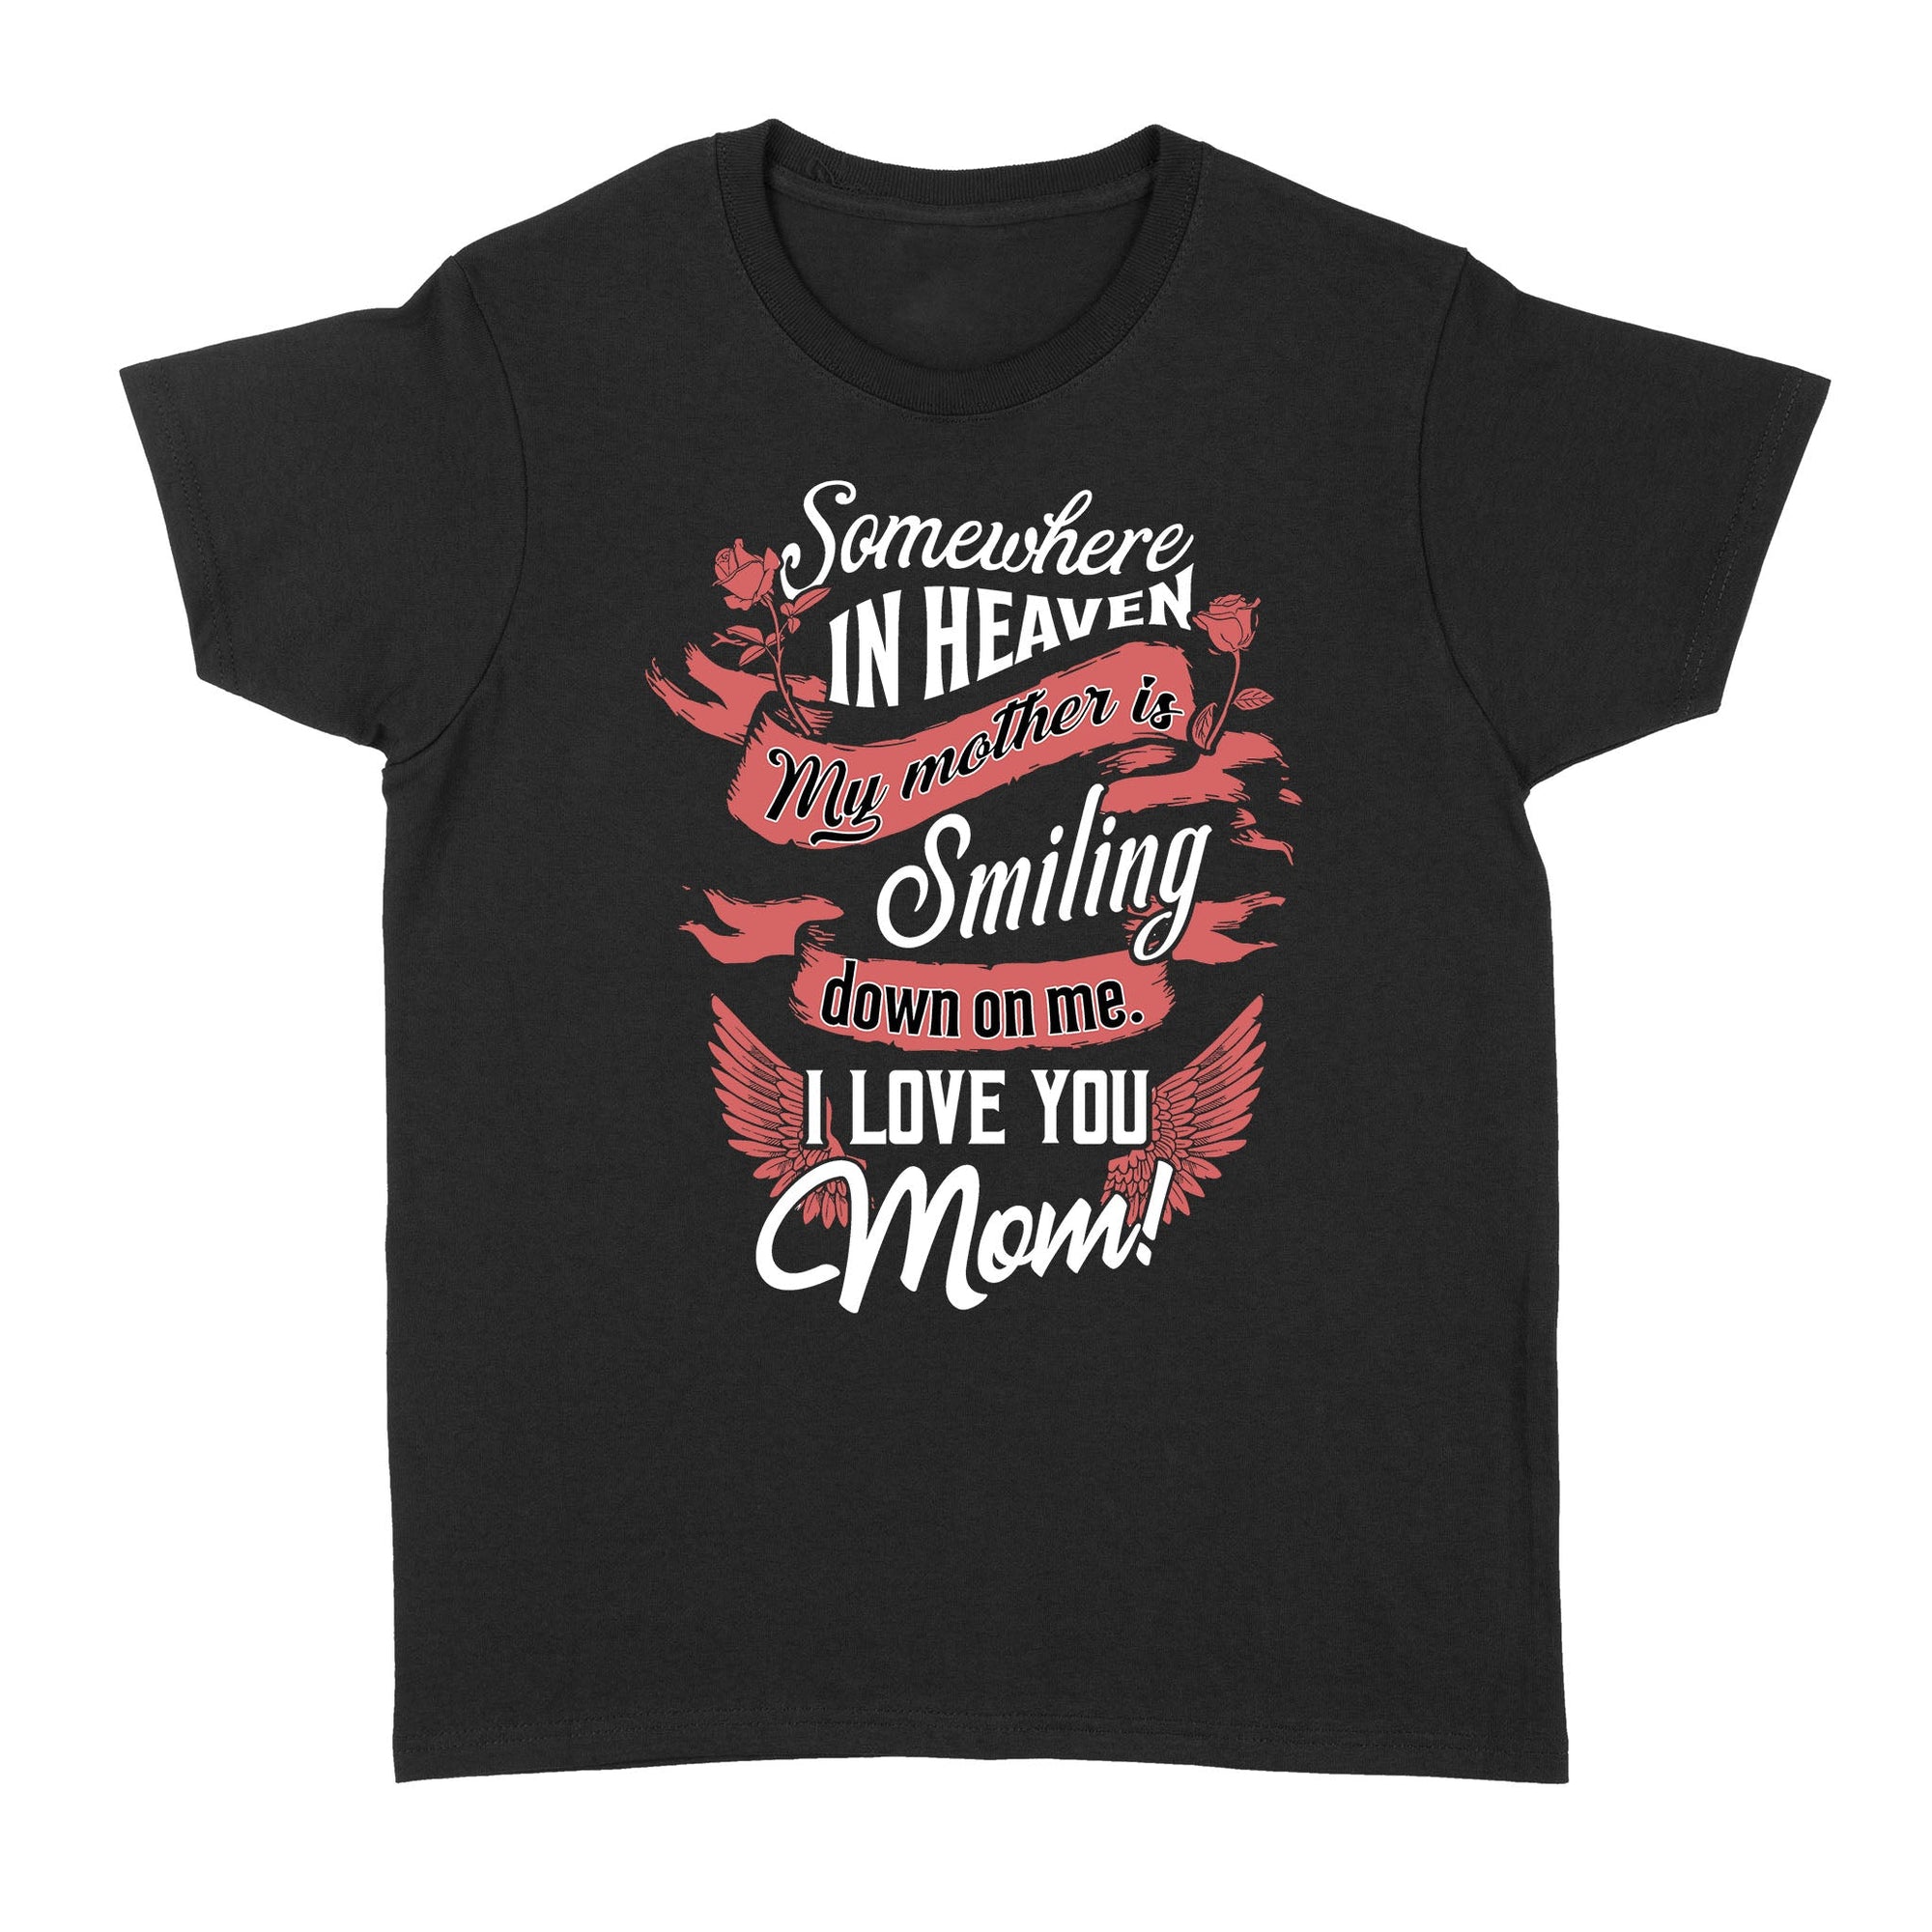 Somewhere In Heaven My Mother Is Smiling Down On Me I Love You Mom Women's T-shirt